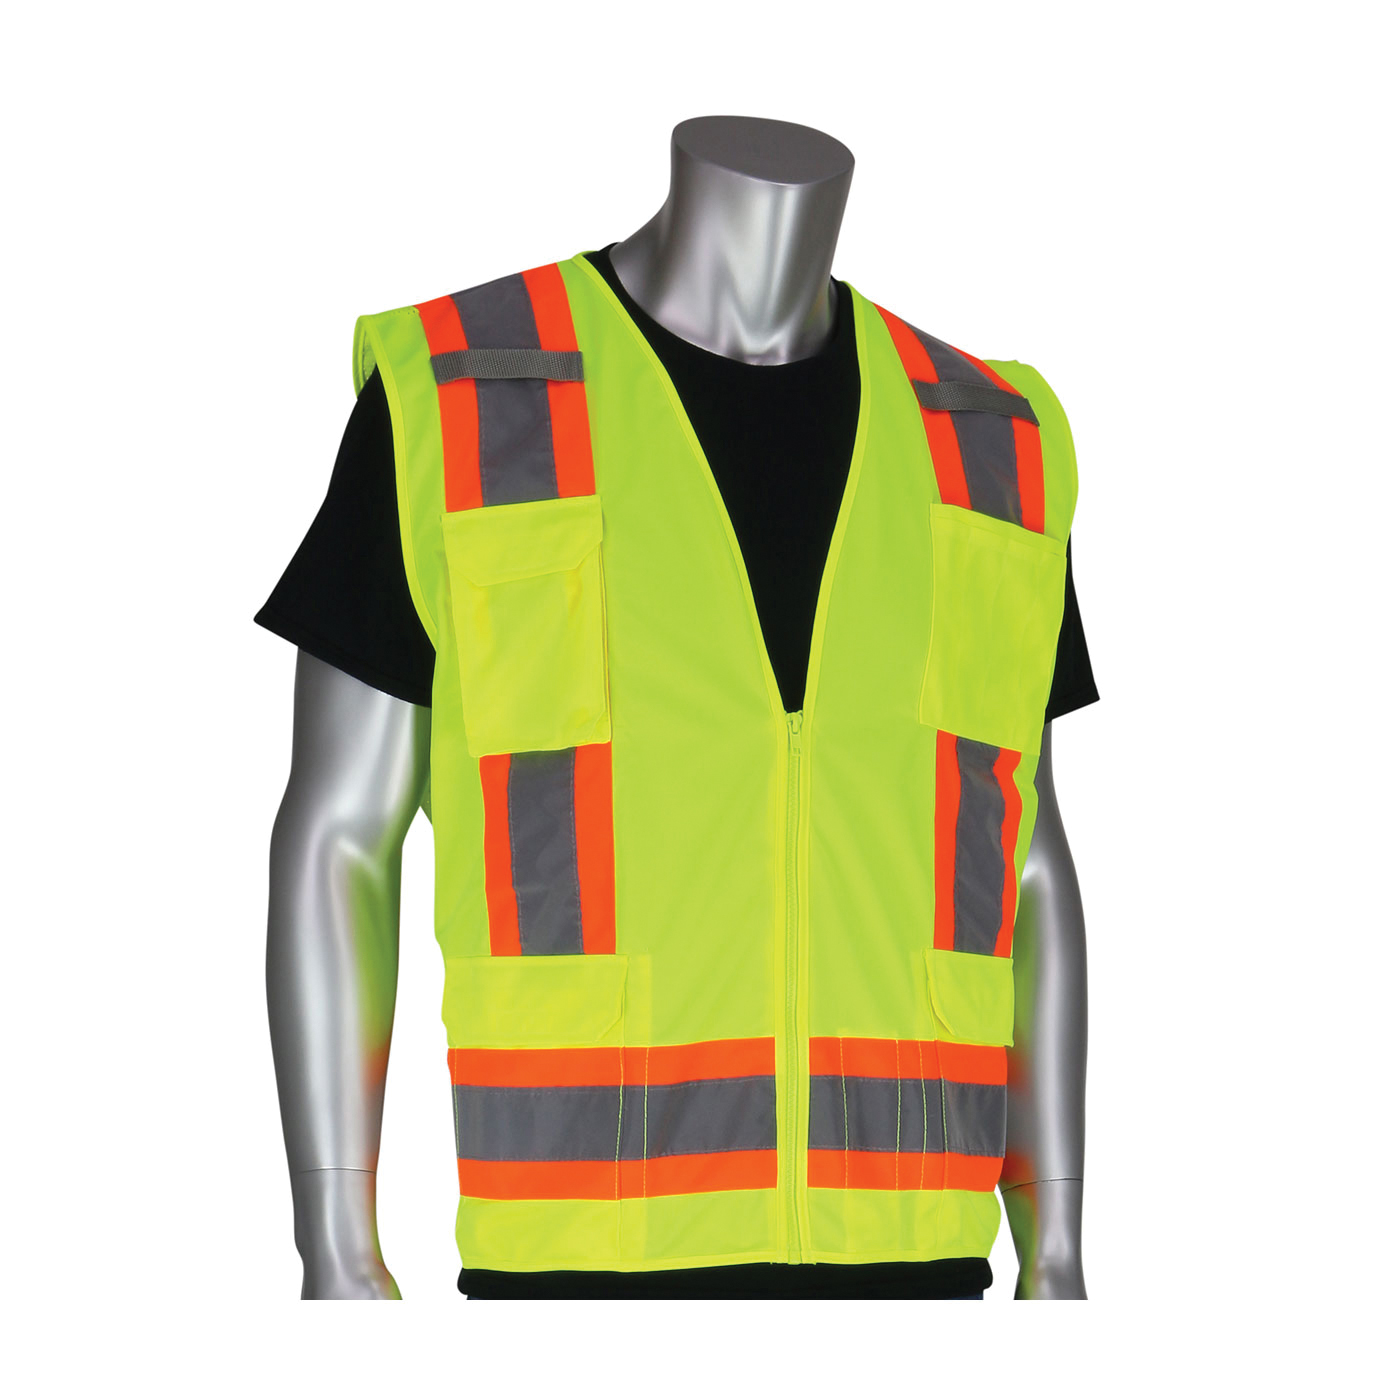 PIP® 302-0500-YEL/M 2-Tone Surveyor Safety Vest, M, Hi-Viz Lime Yellow, Polyester/Solid Tricot, Zipper Closure, 11 Pockets, ANSI Class: Class 2, Specifications Met: ANSI 107 Type R